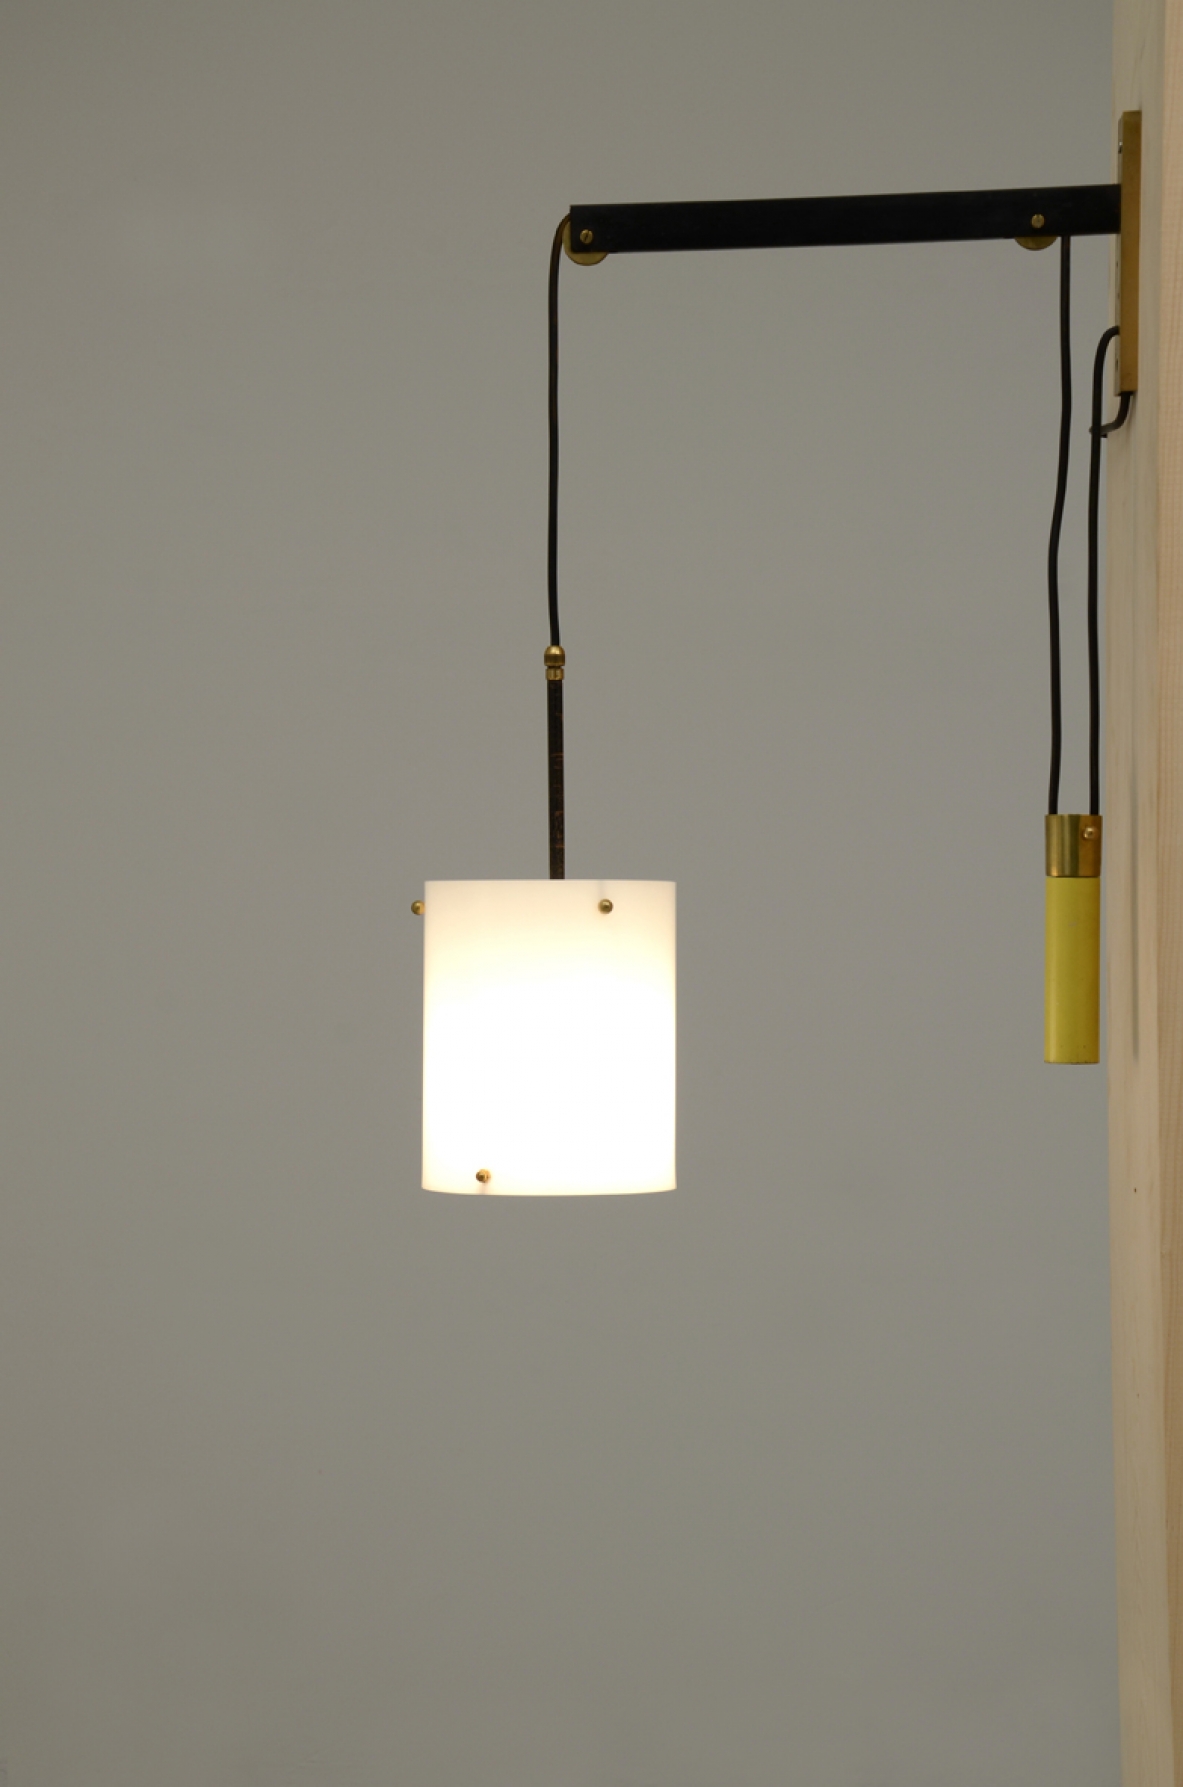 Adjustable wall lamp with yellow weight and a white polypropylene shade. France, 1950's.